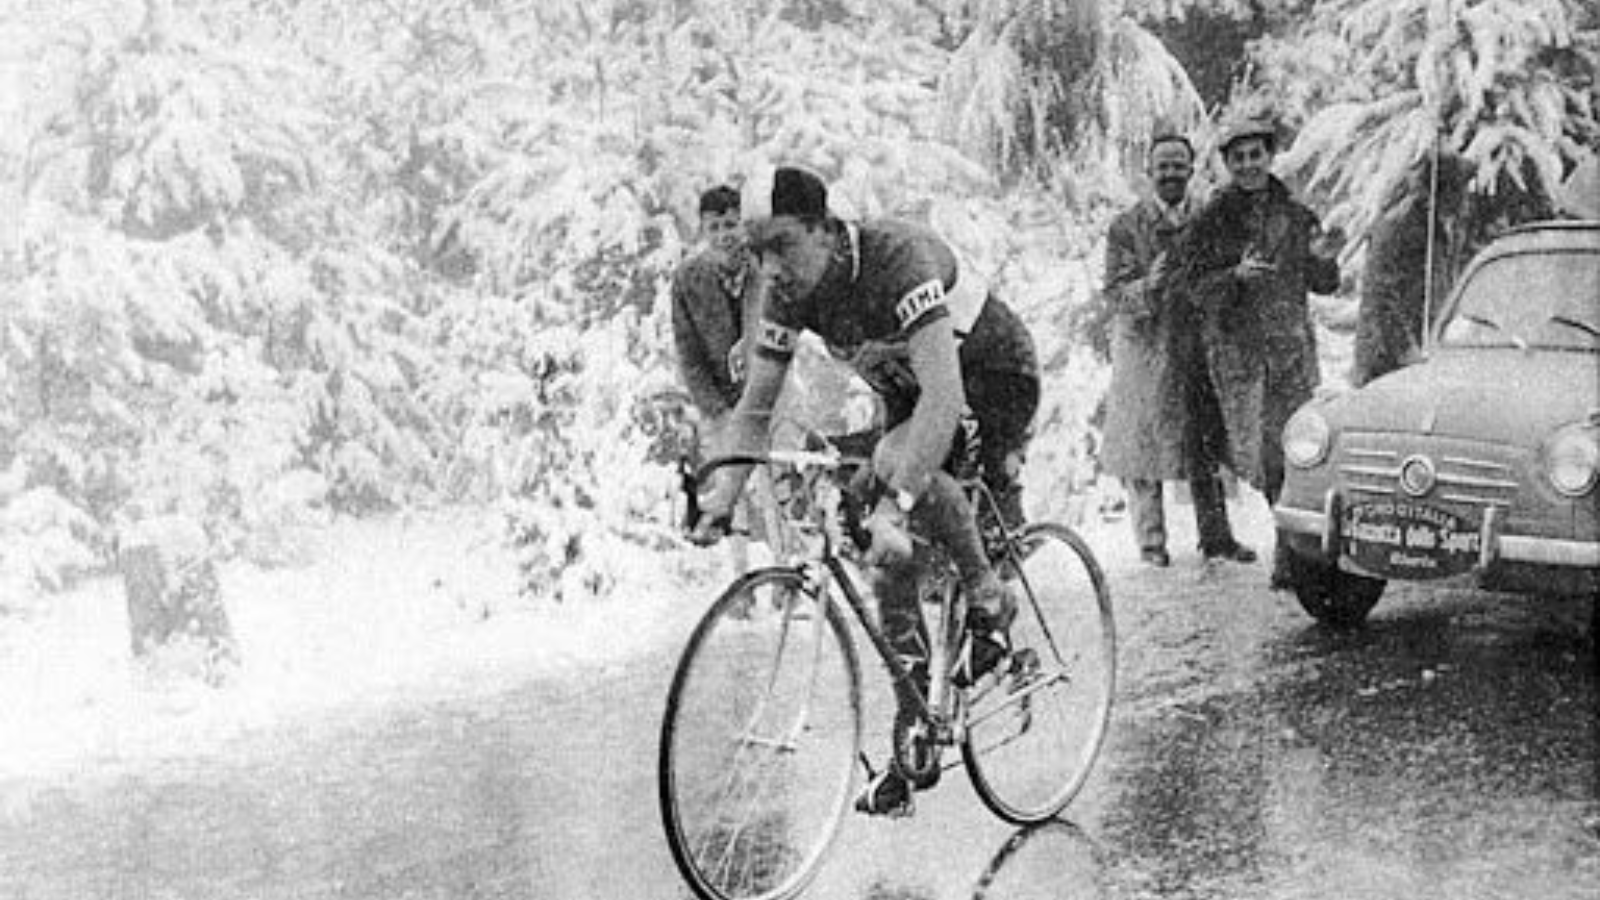 Iconic snow images at the Giro d'Italia Charly Gaul on the Monte Bondone 1956